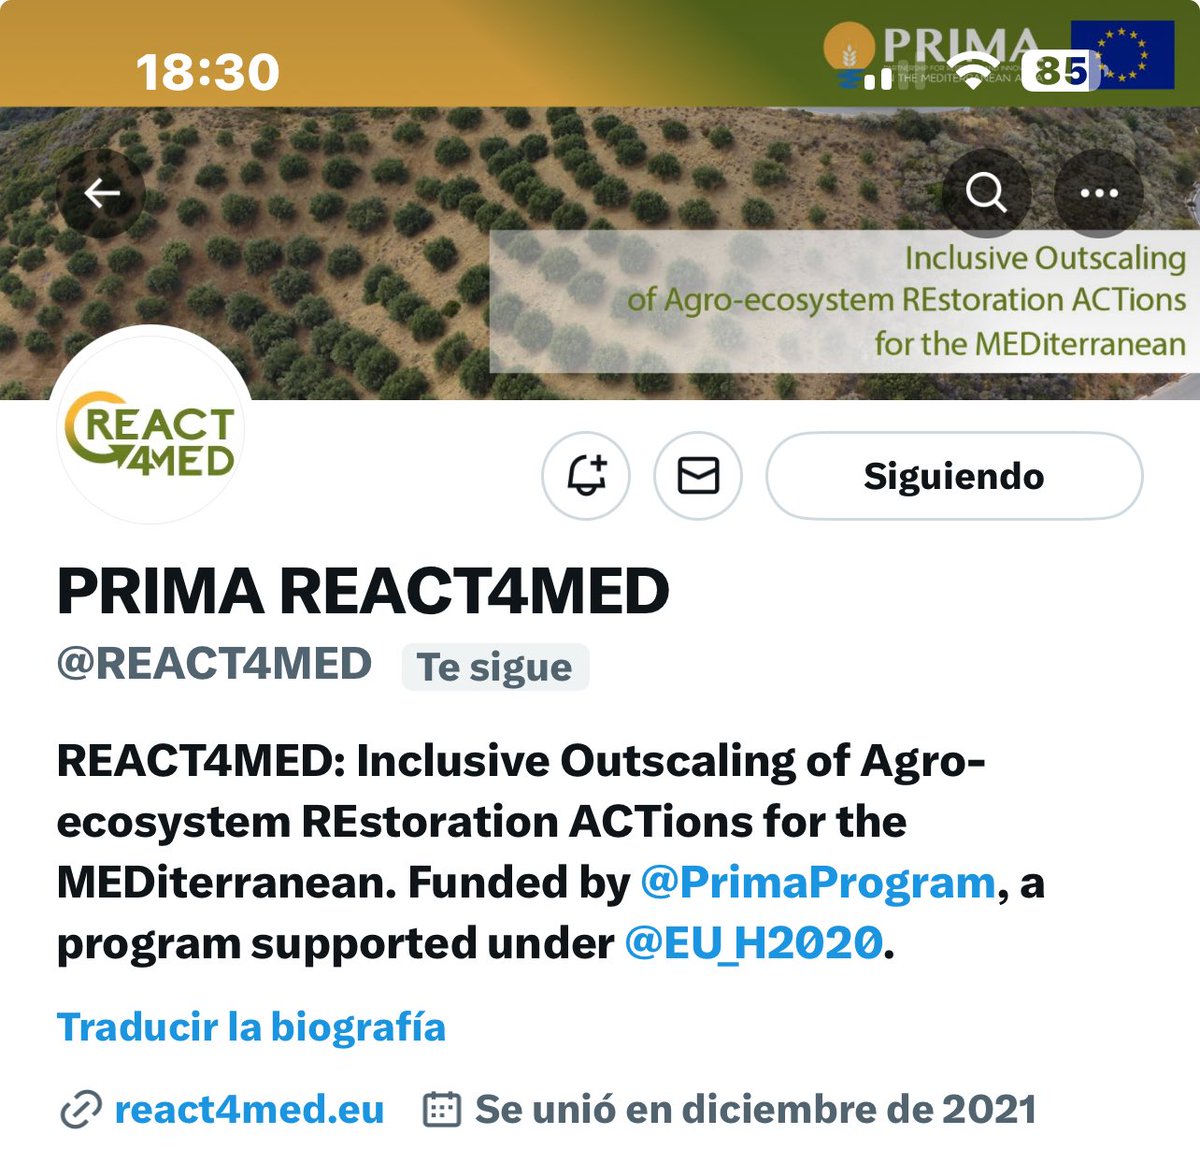 ⁦@REACT4MED⁩ ⁦@PrimaProgram⁩ research project is very active in the social media. Follow us at @react4med and resct4med.eu ⁦@yannishimself⁩ ⁦@manpufer⁩ ⁦@geo_jrc⁩ ⁦@BarrenaJesus⁩ #soils #water #management #life #sustainability